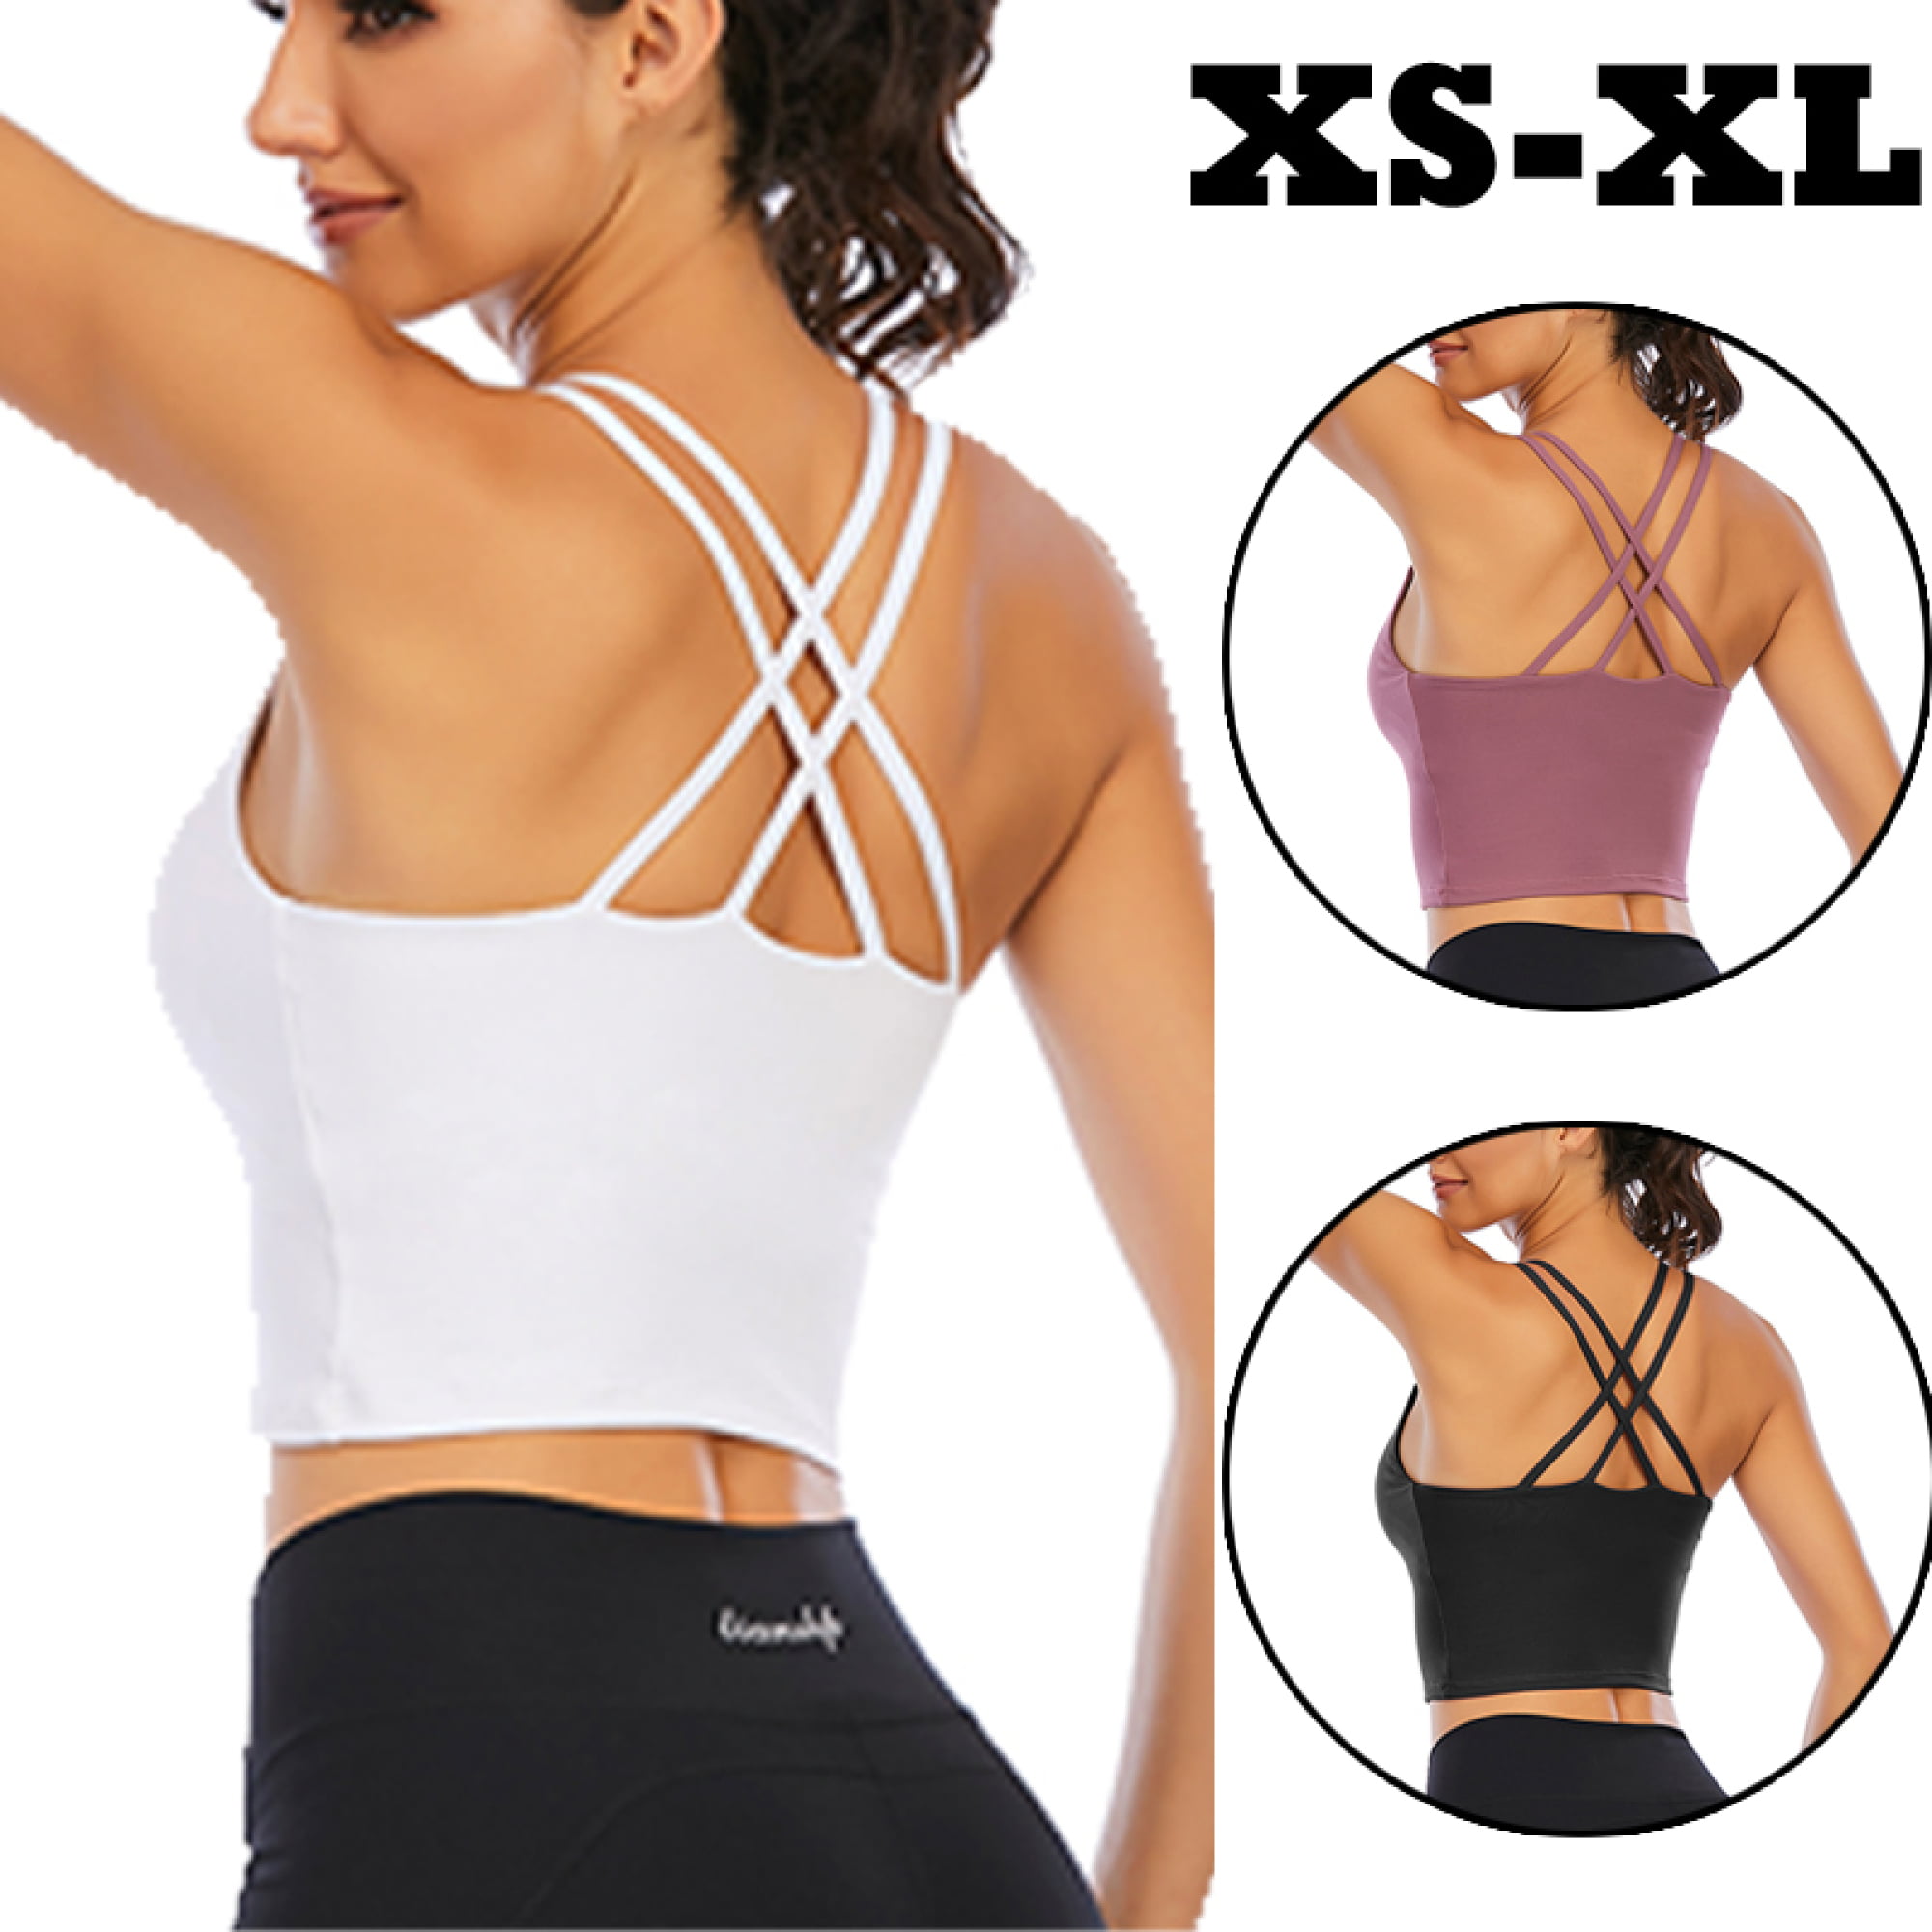 Leoyee Sleeveless Fitness Yoga Beautiful Back Womens Built-in Coaster Bra B/C Cups Strappy Back Activewear Workout Vest Sleeveless 